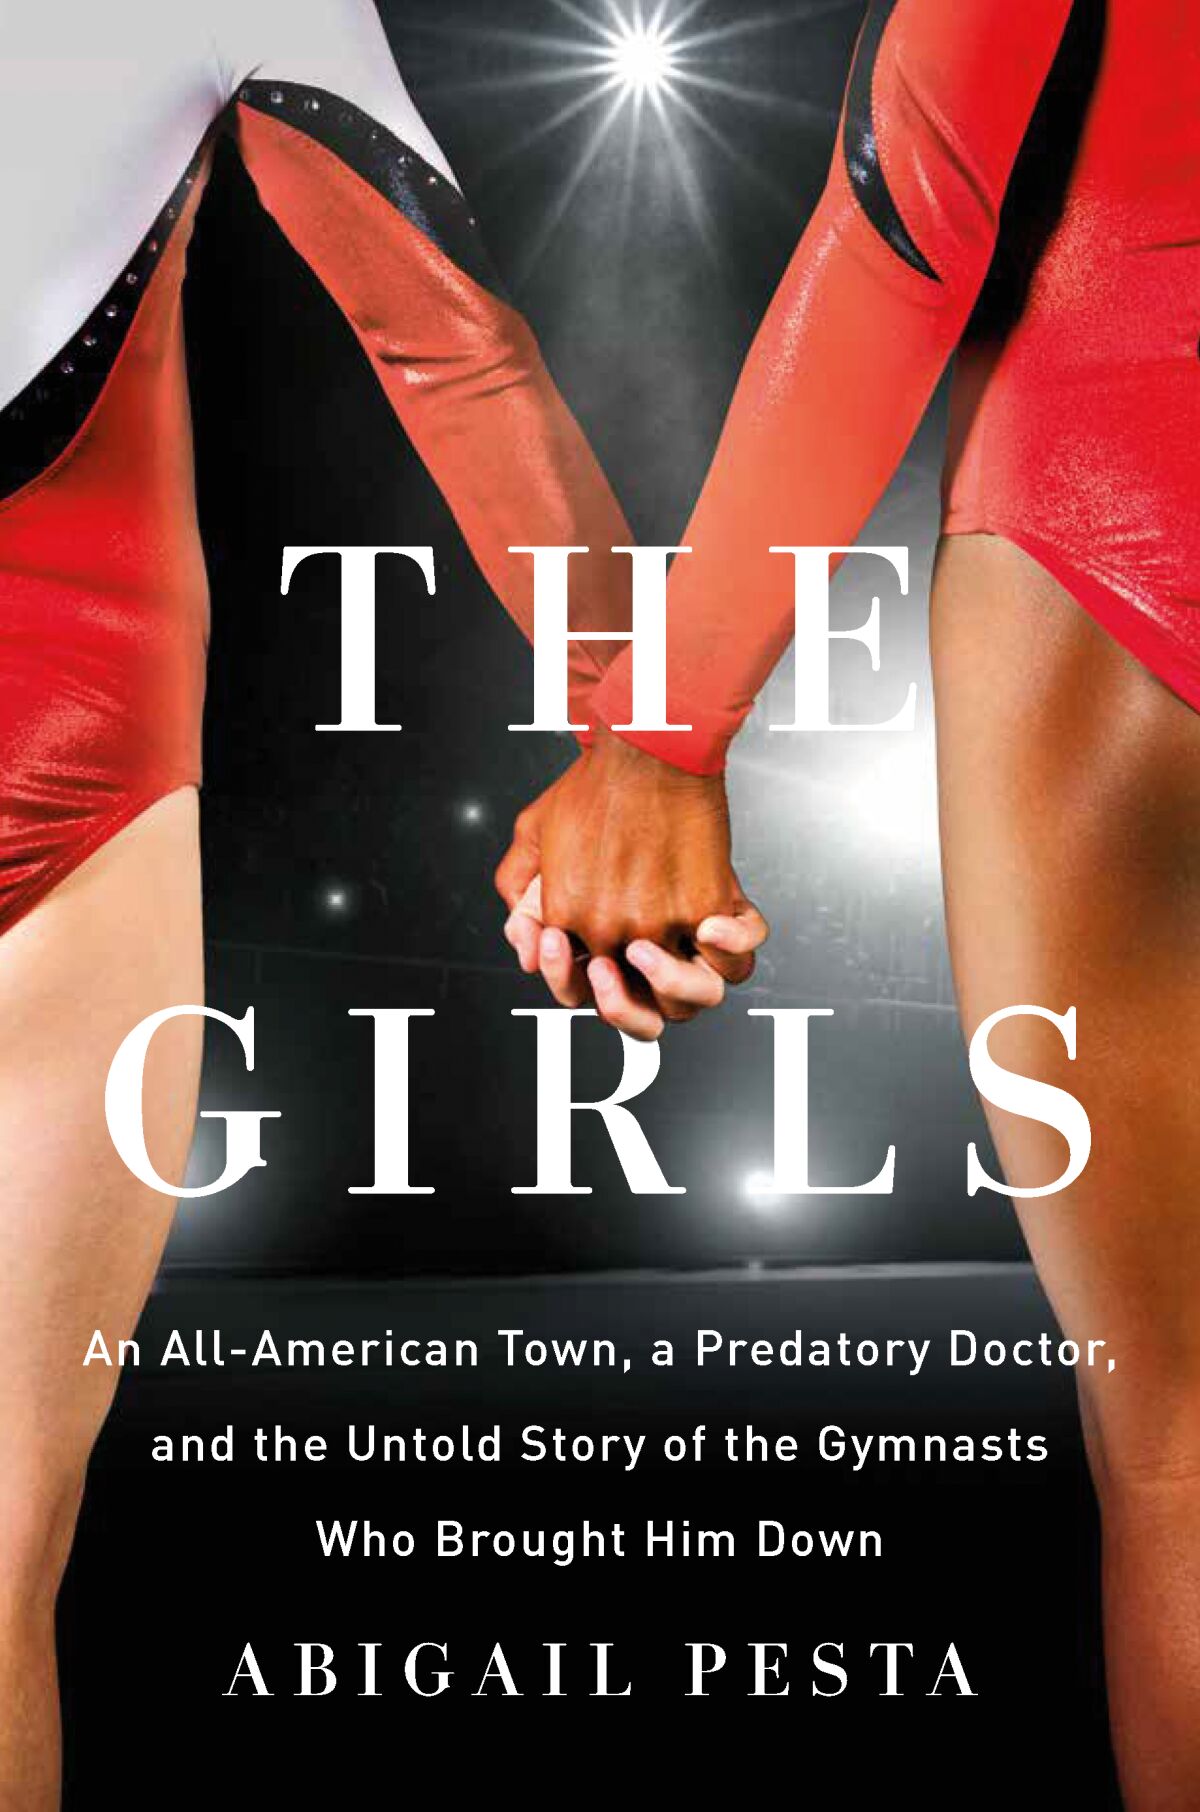 "The Girls: An All-American Town, a Predatory Doctor, and the Untold Story of the Gymnasts Who Brought Him Down" by Abigail Pesta. 